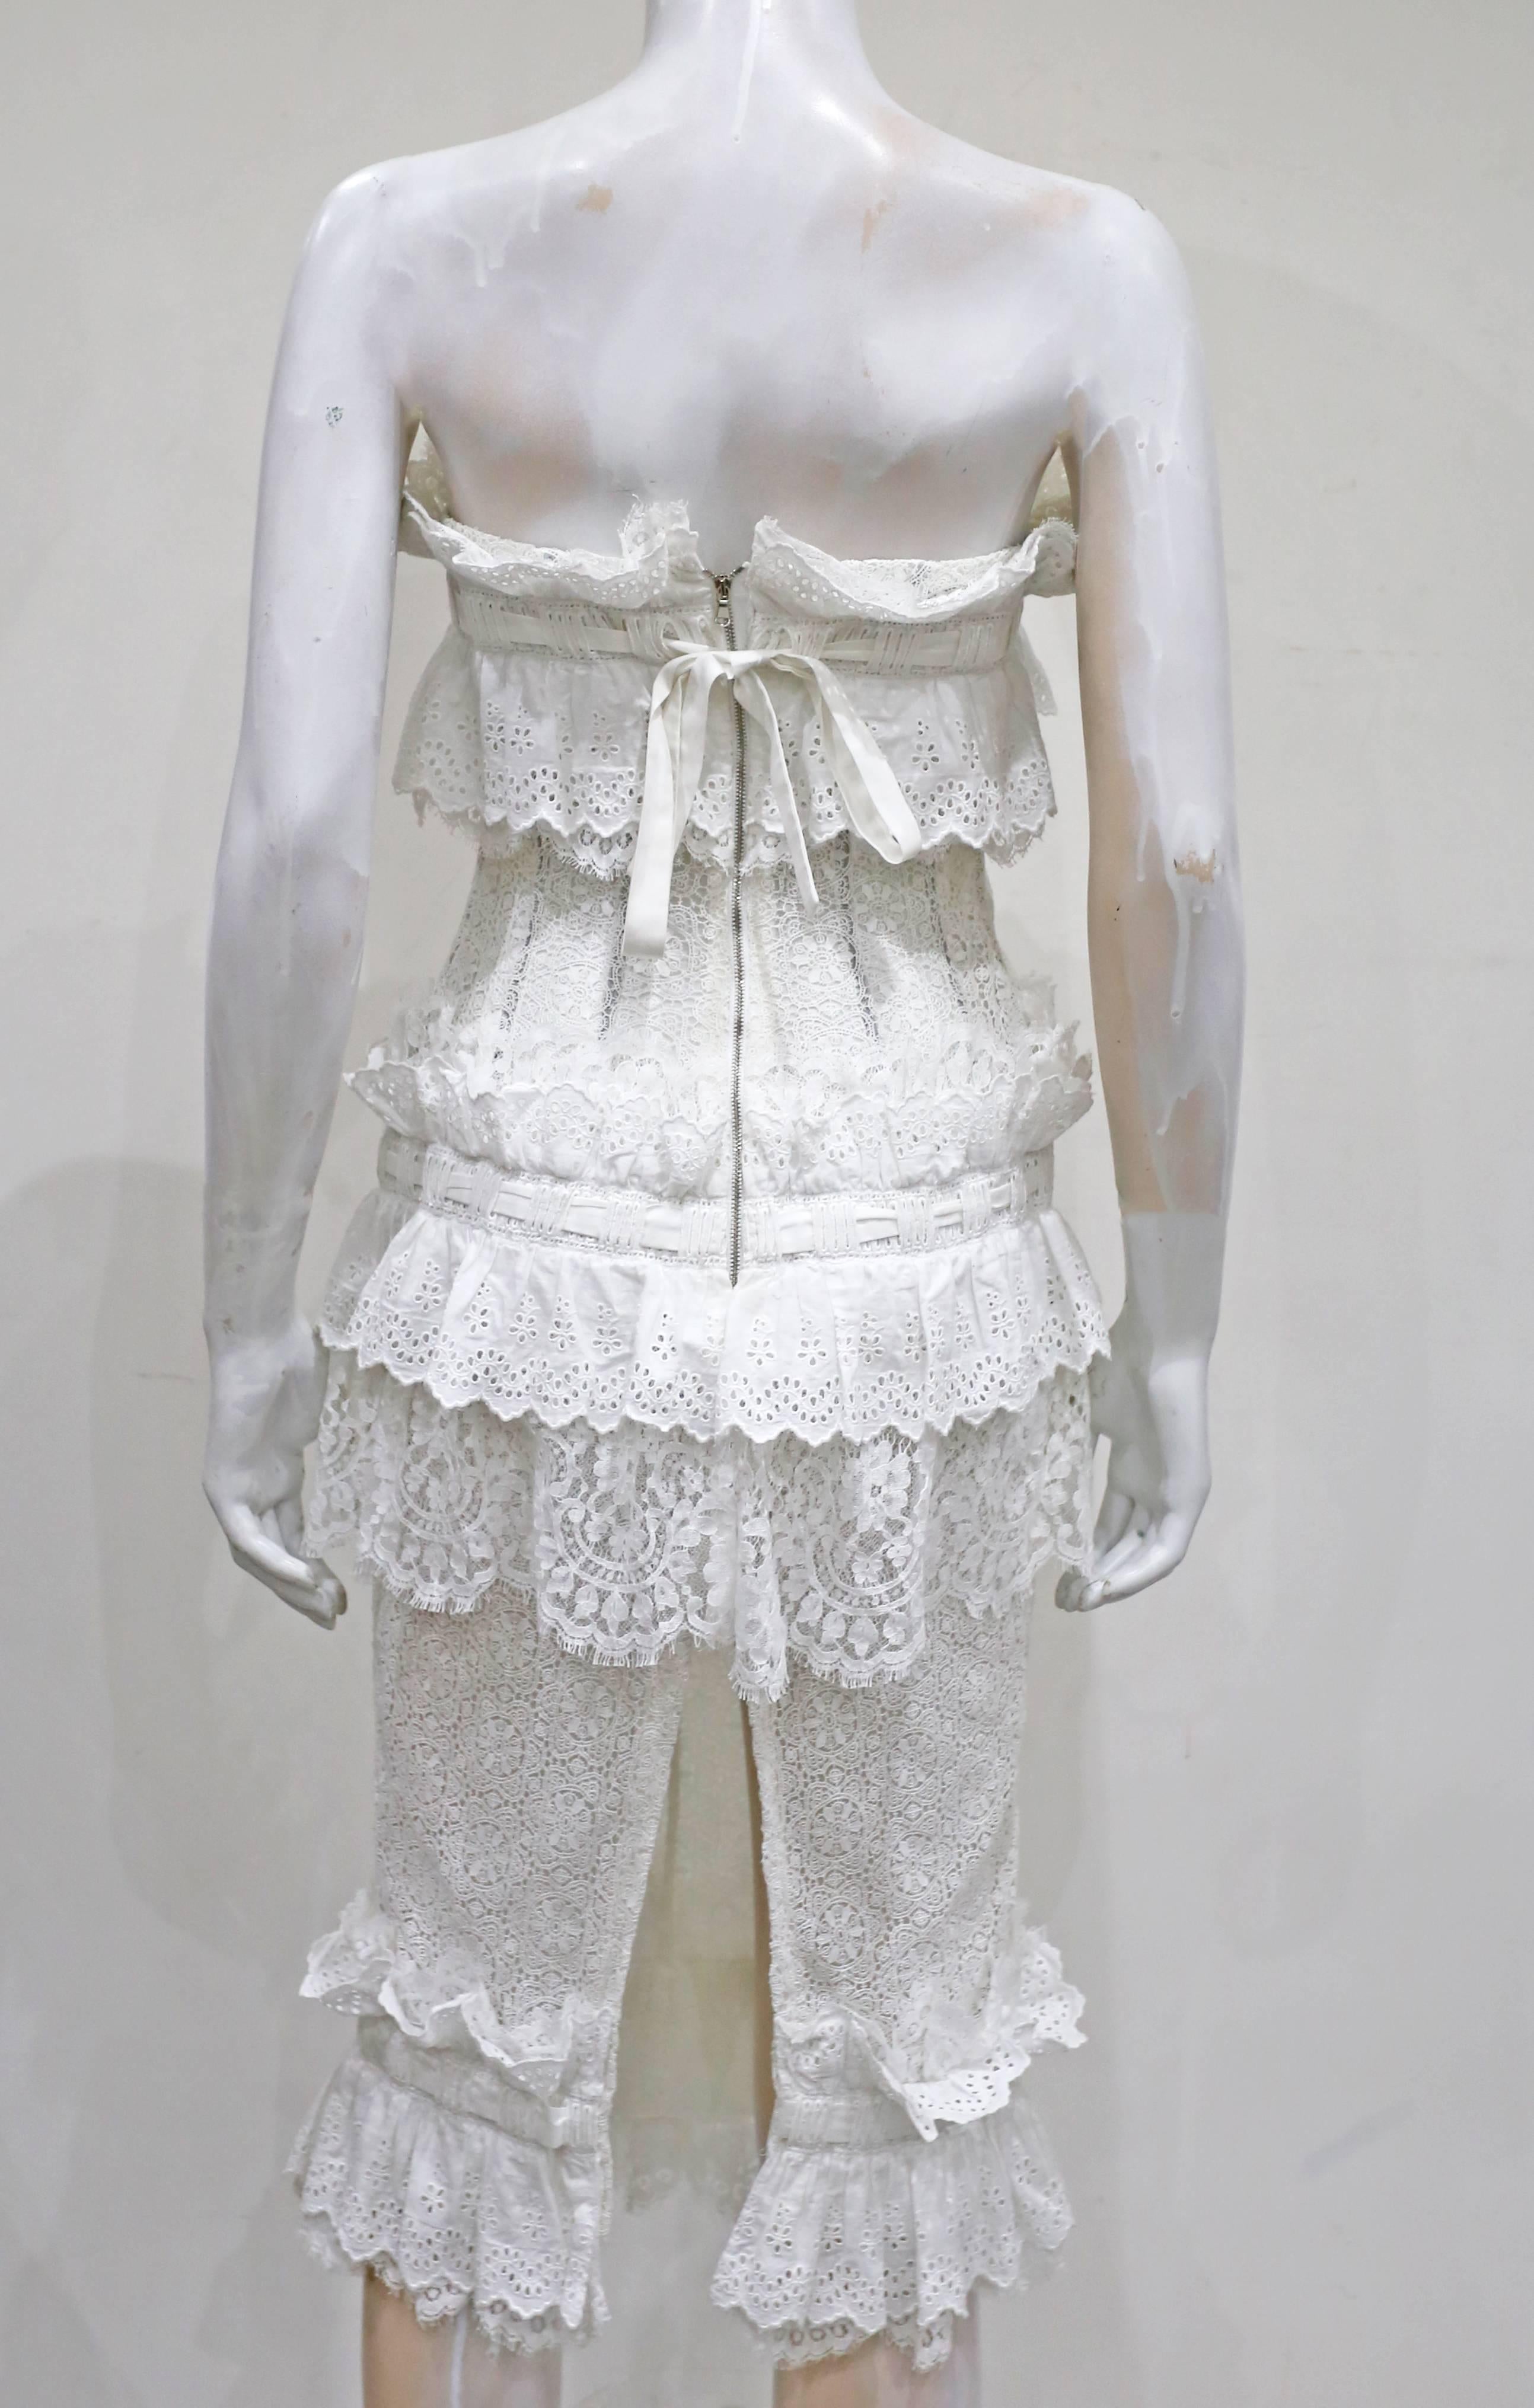 Dolce & Gabbana corseted broderie anglaise lace ruffled strapless dress, c.1990s 3